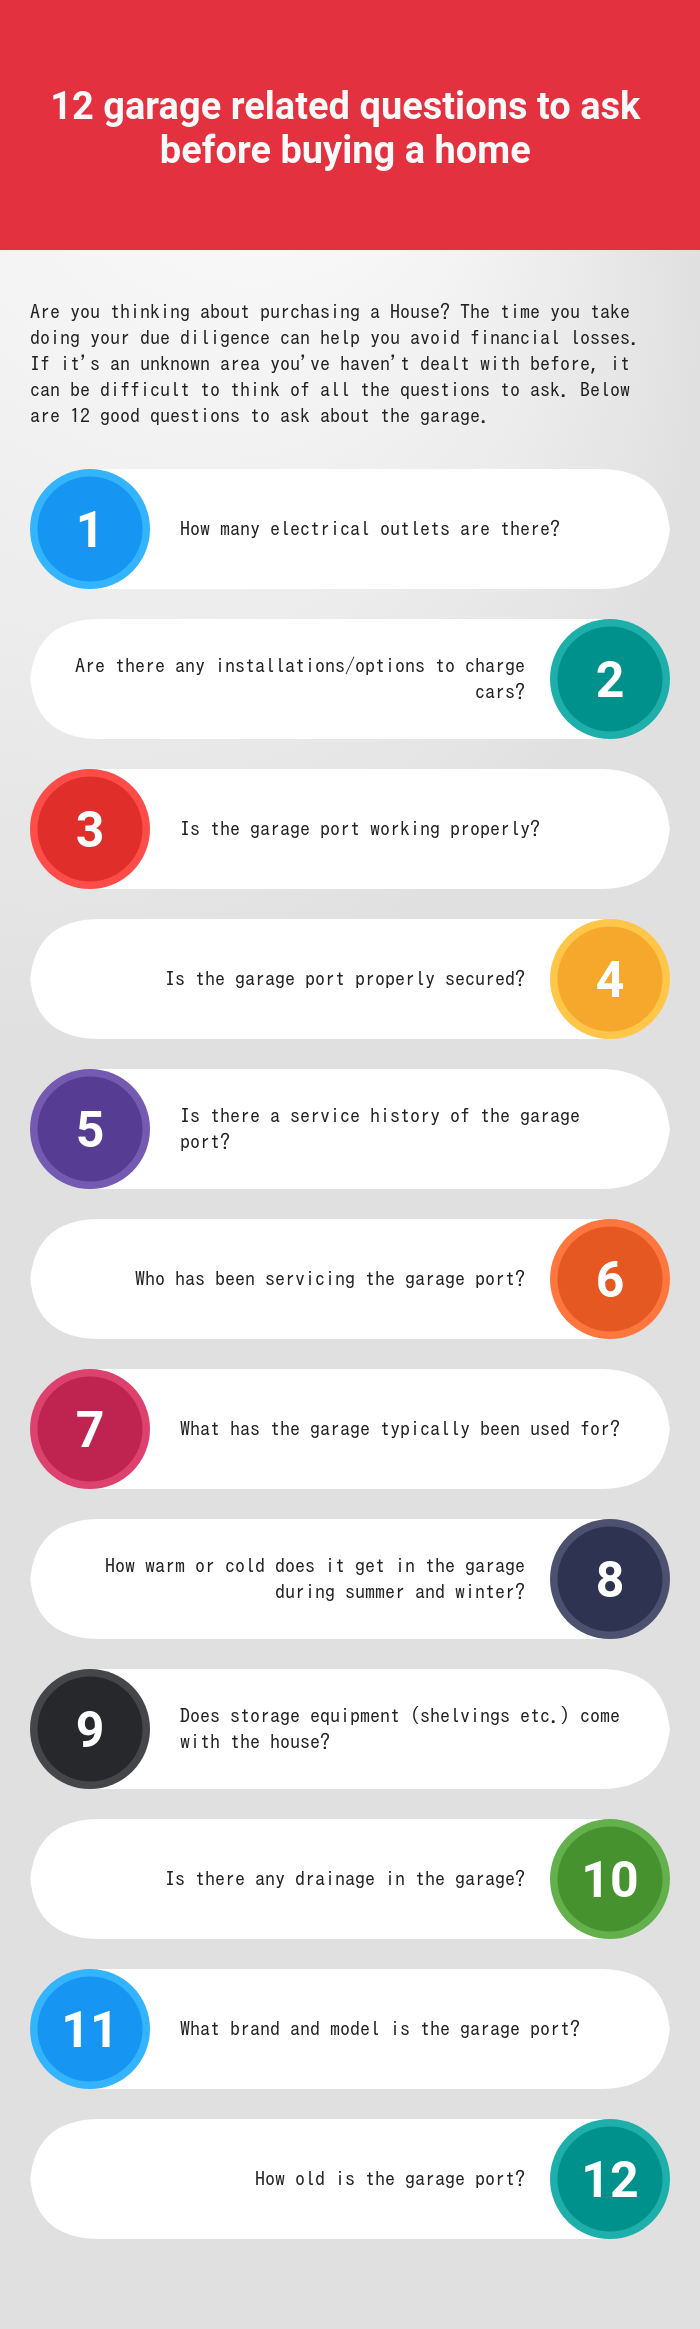 12 garage related questions to ask before buying a home